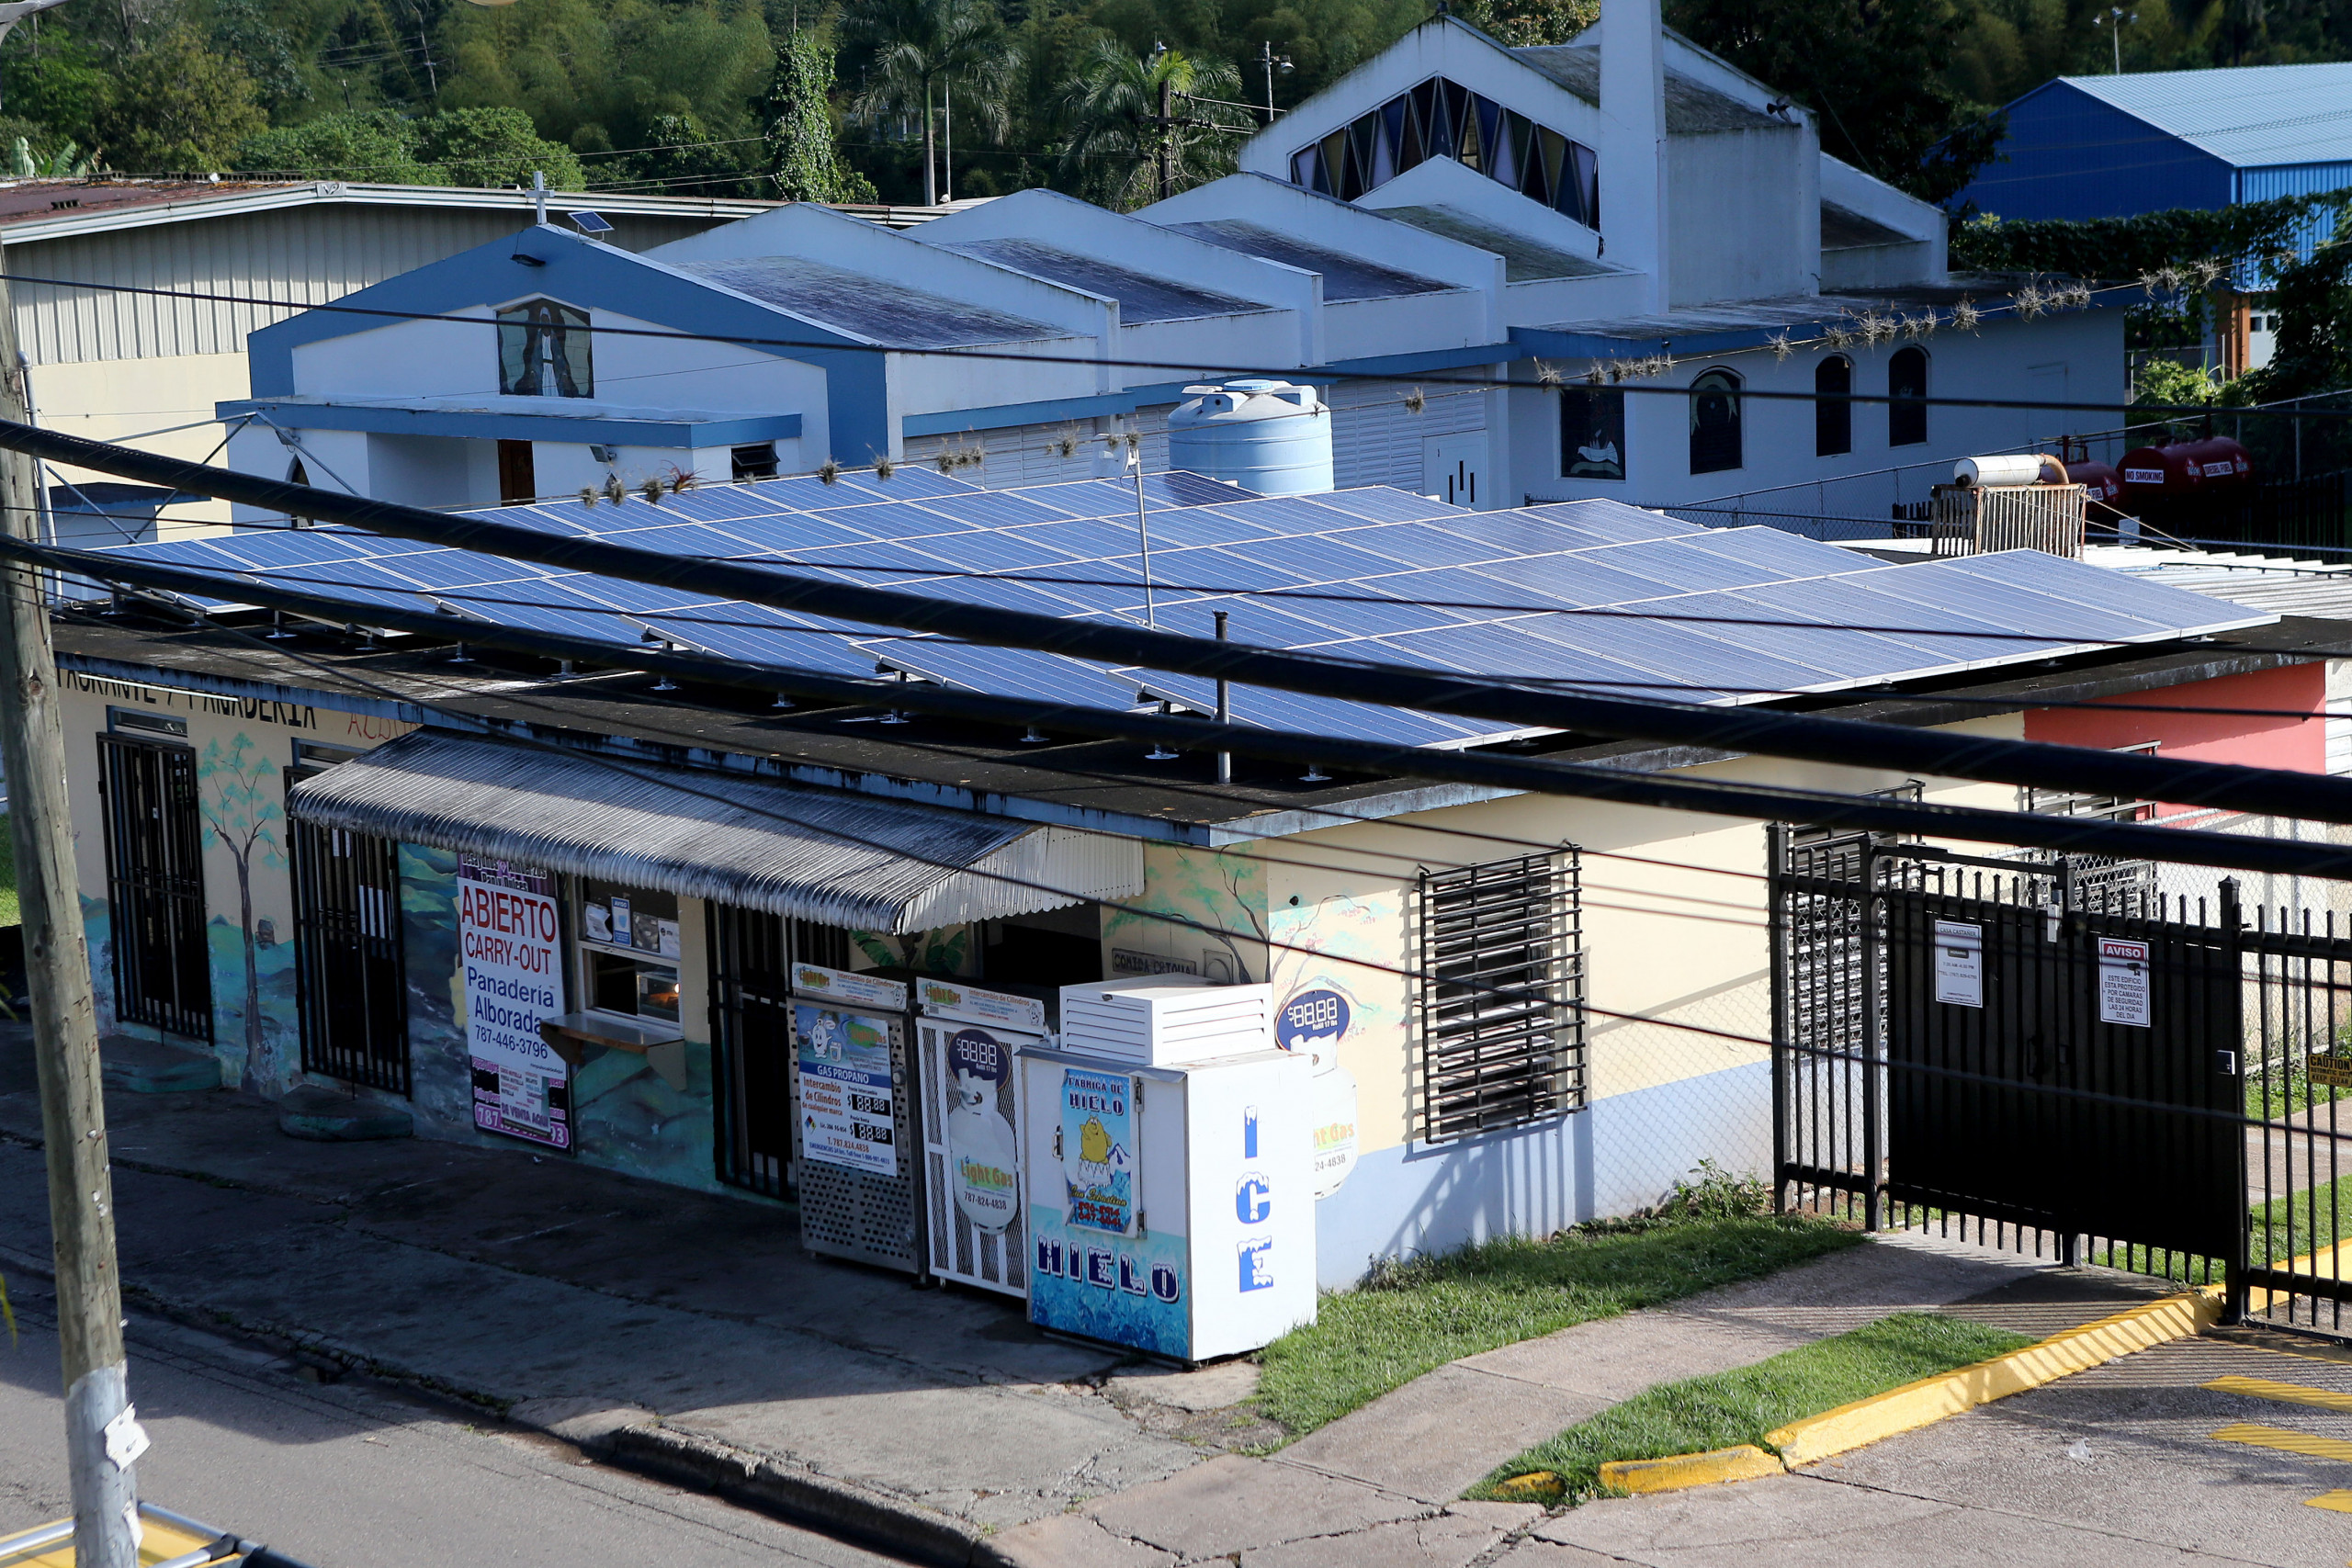 IREC and Puerto Rico’s First Electric Cooperative Issue RFP for Solar Energy Microgrid in Maricao, Puerto Rico